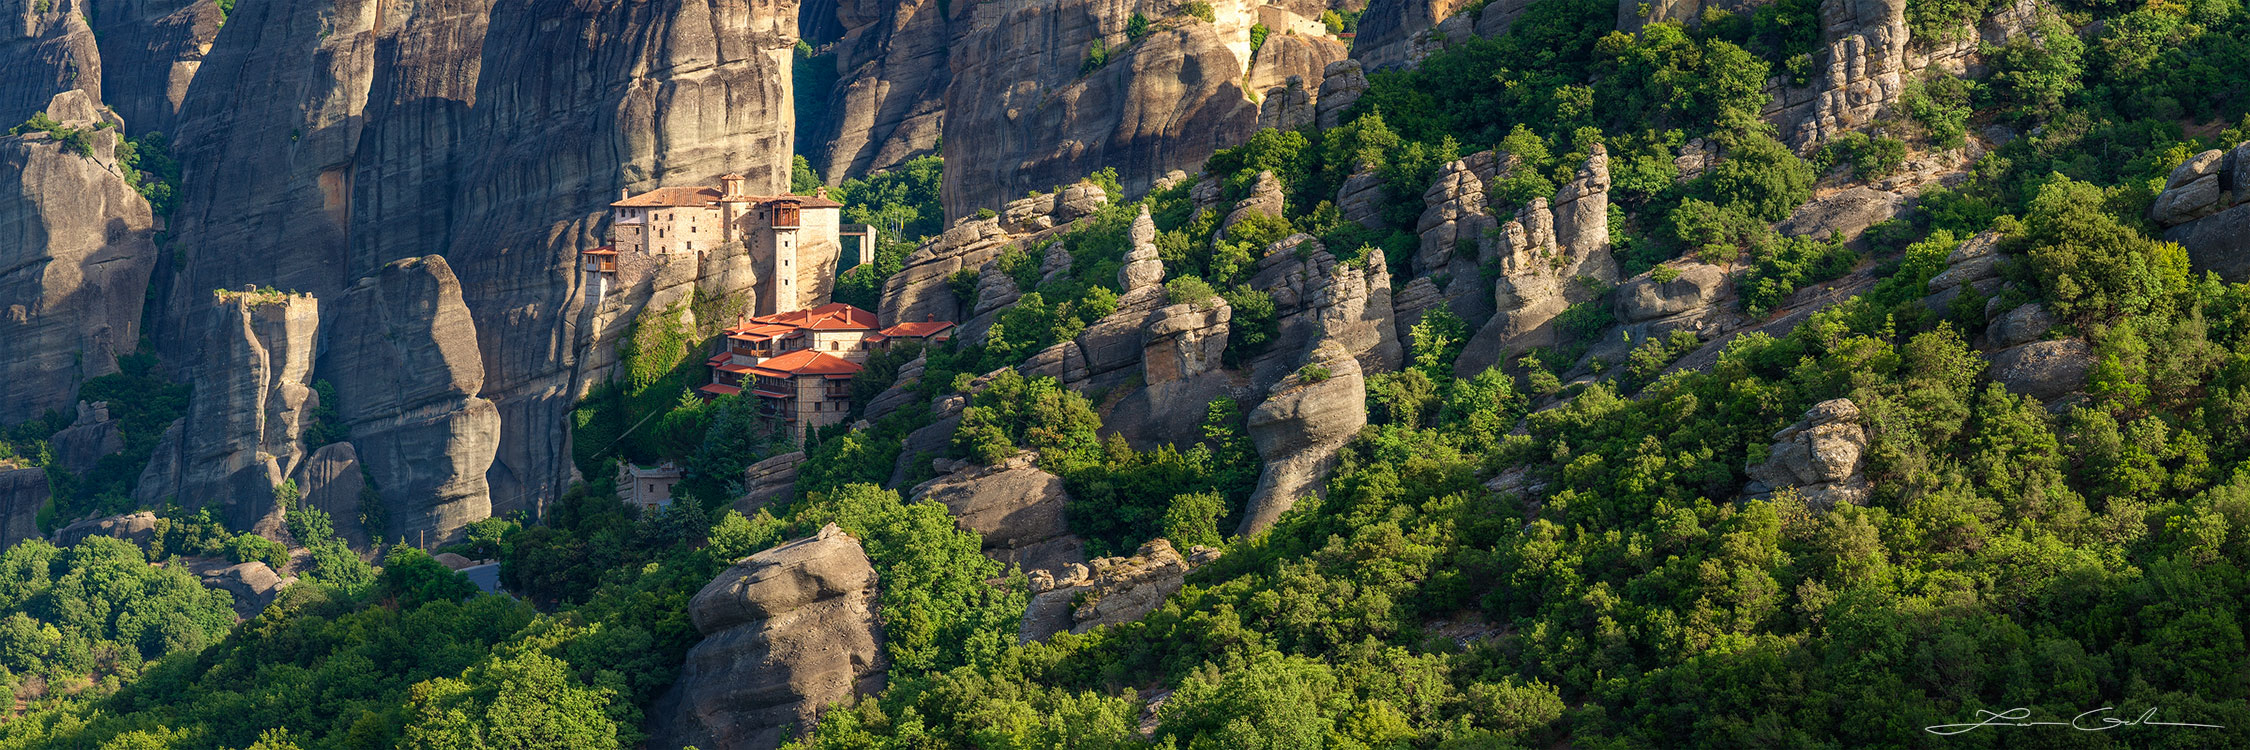 A panorama of Meteora, Greece featuring the Roussanou Monastery and lots of rocks and vertical walls - Gintchin Fine Art